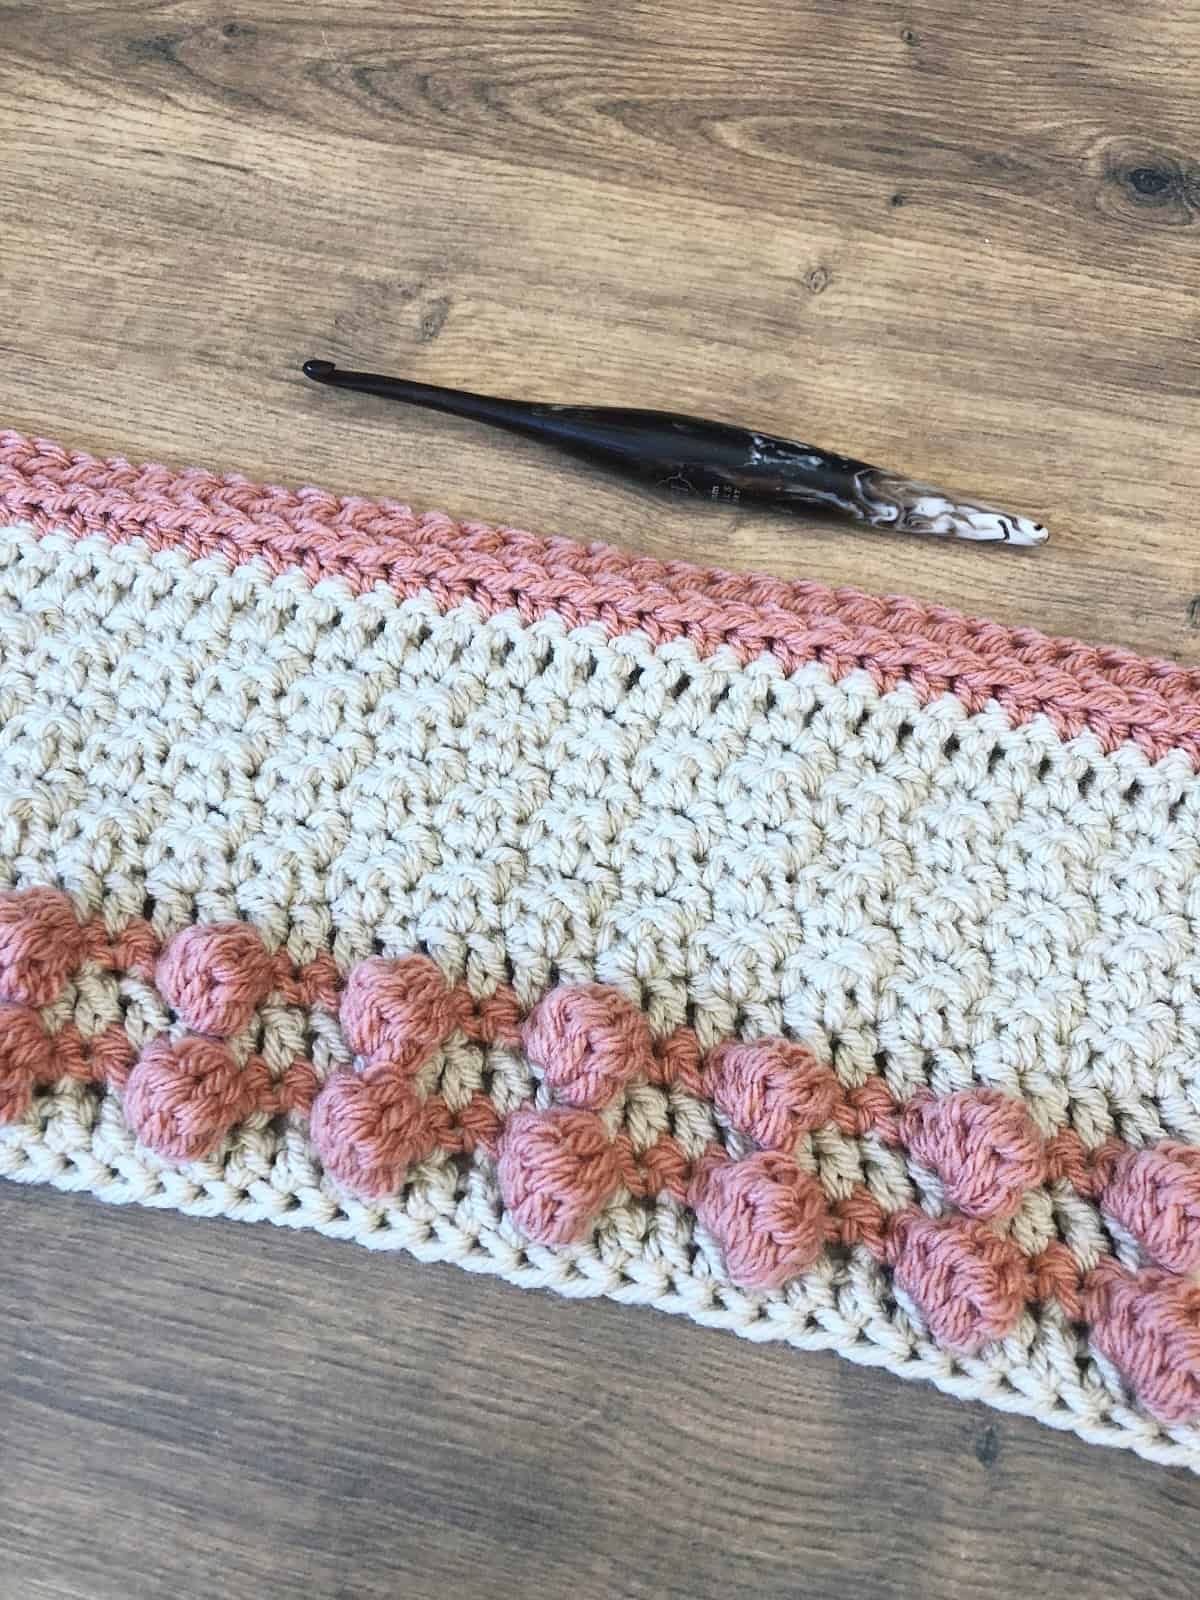 Progress of shawl with stripes and texture.